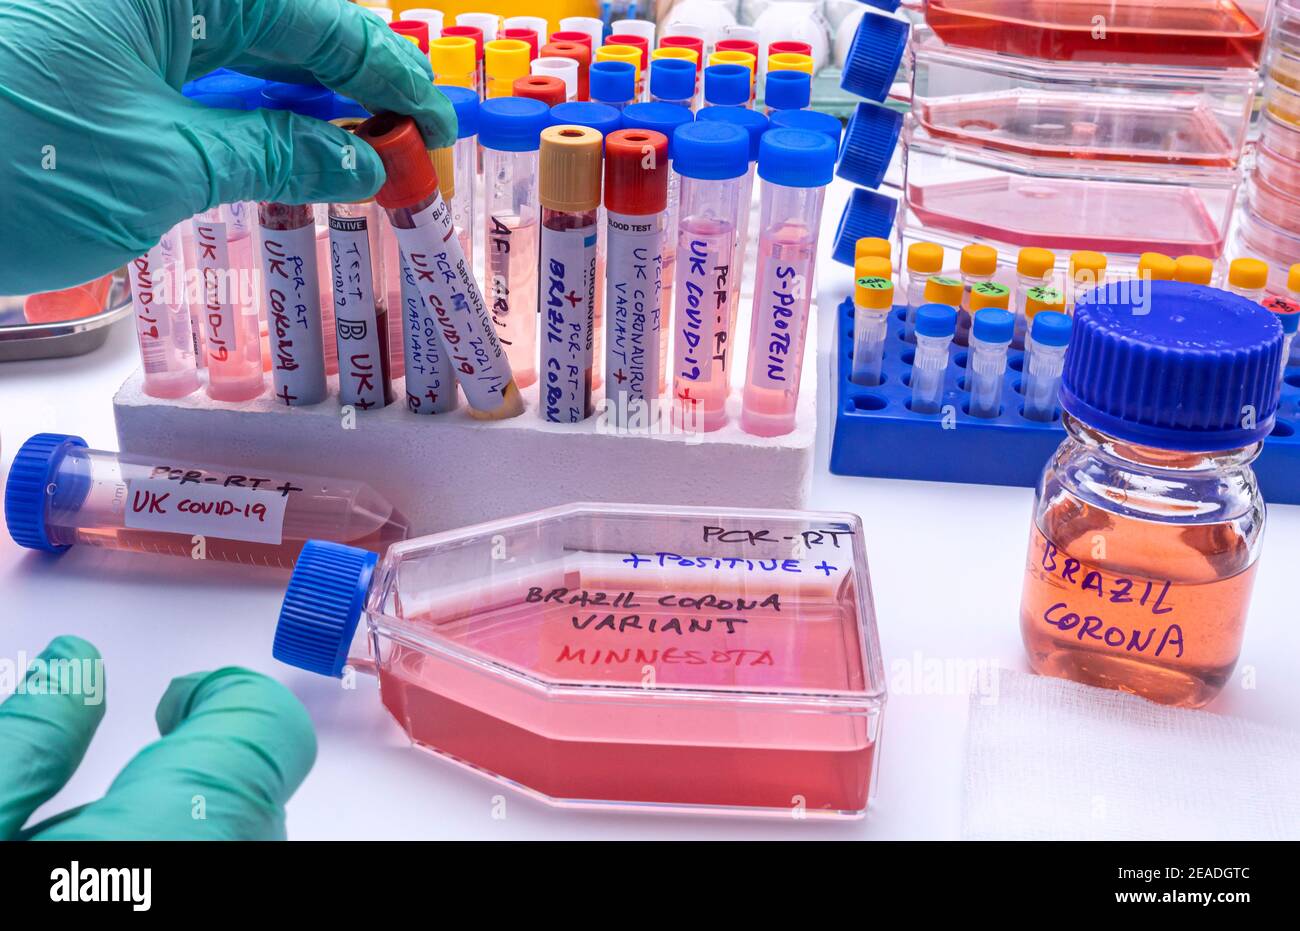 Scientist holds vial of blood sample with positive result for covid-19 infection of new variant in UK, concept image Stock Photo